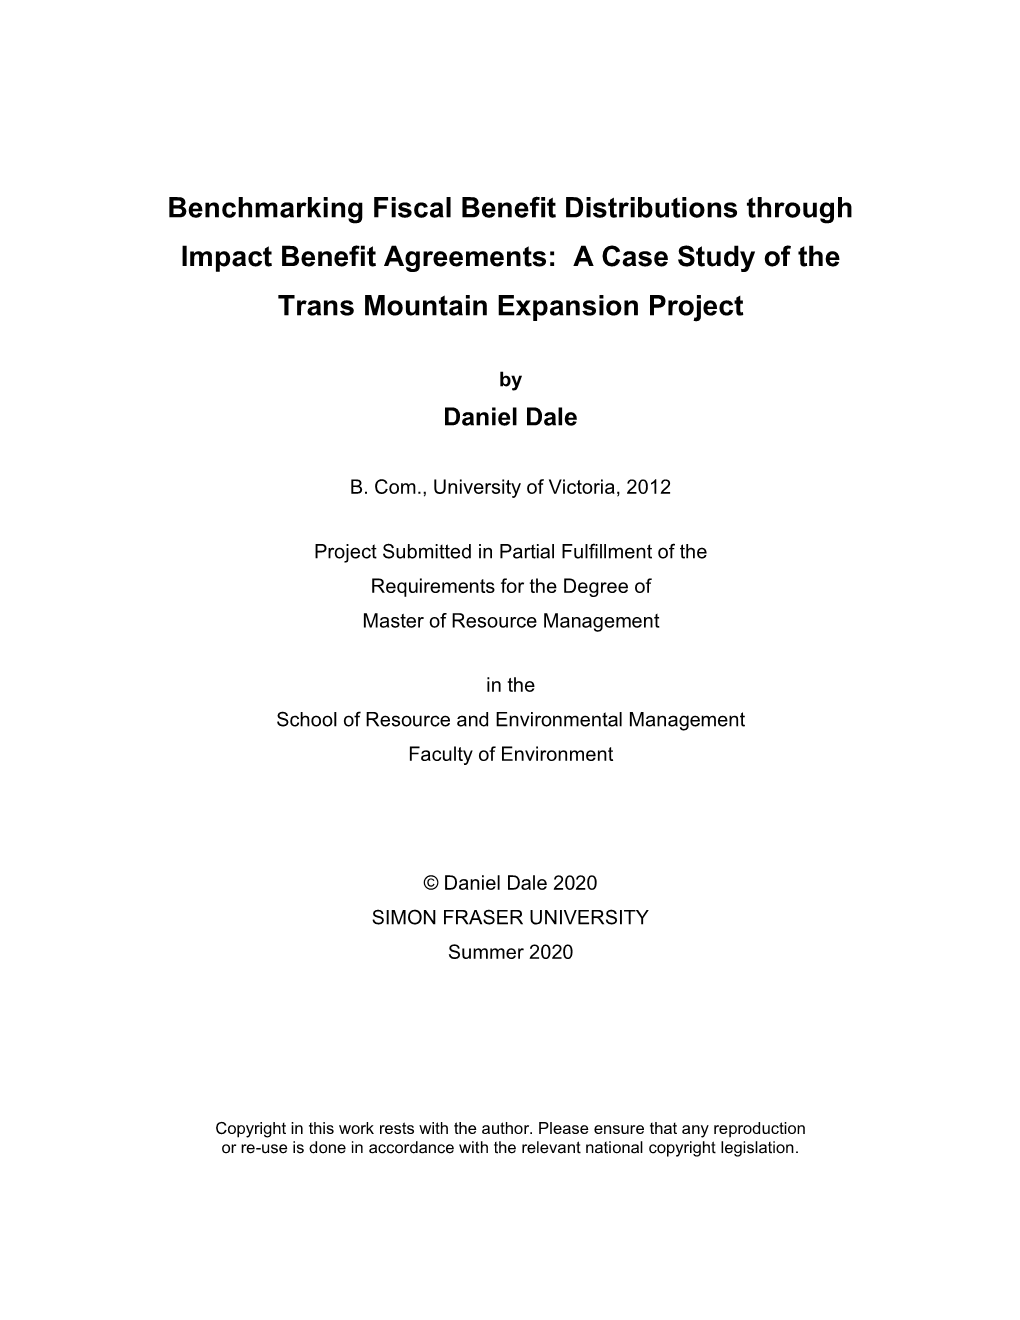 4.3.3 the Fiscal Benefits of the TMX Benefits Sharing Agreements